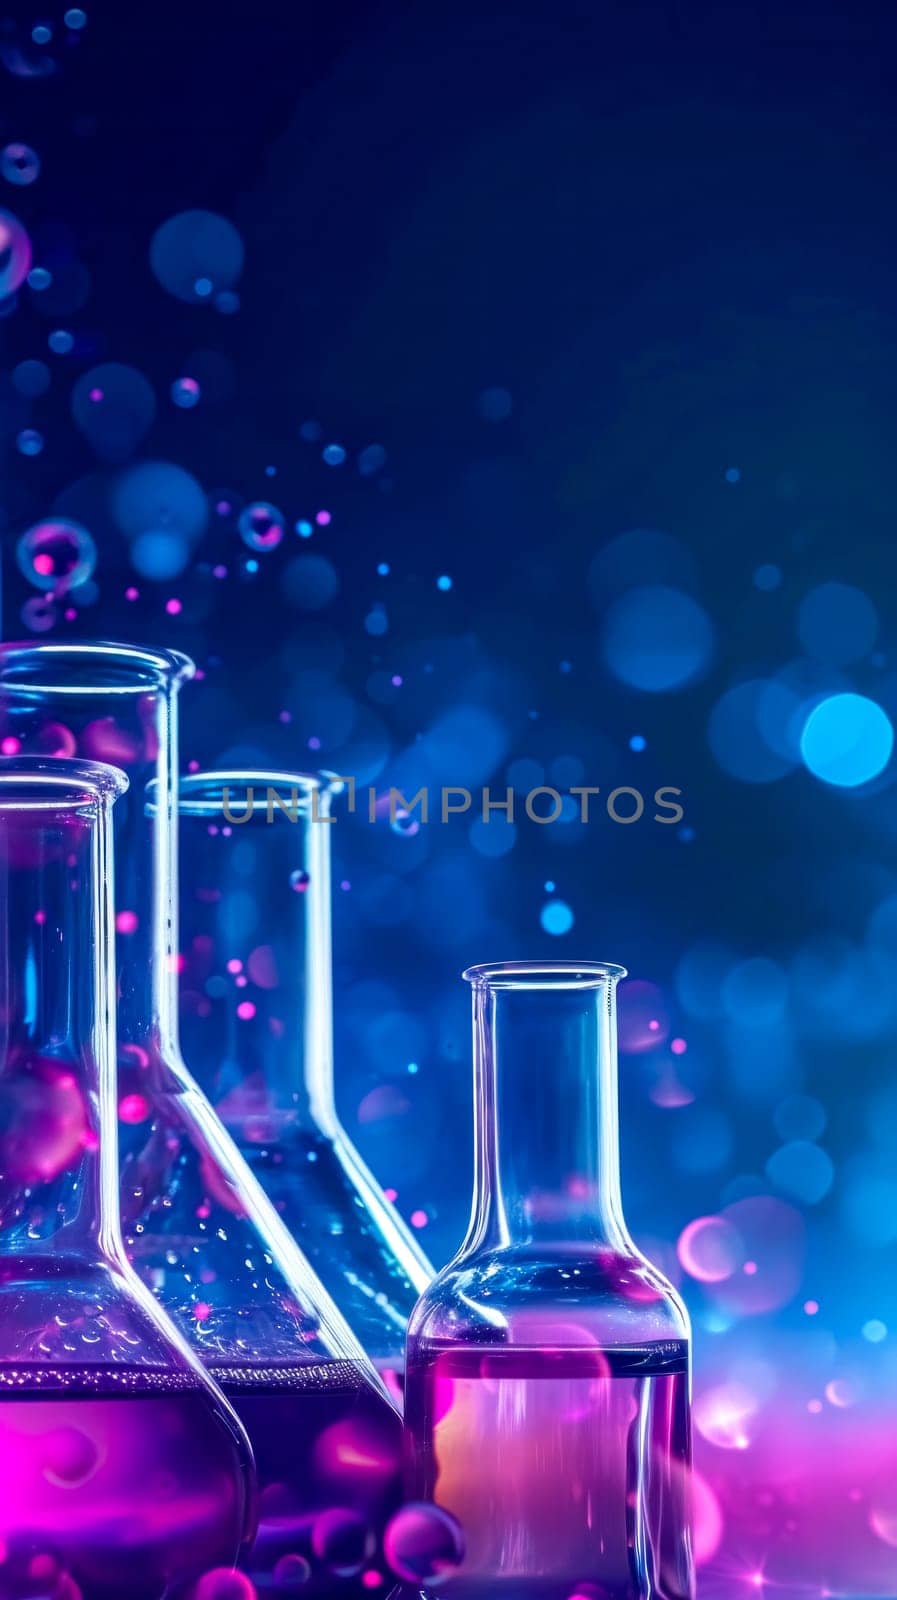 scene in a laboratory setting, featuring transparent glassware filled with substances emitting a bioluminescent glow in shades of blue and purple, wonder and the thrill of scientific discovery